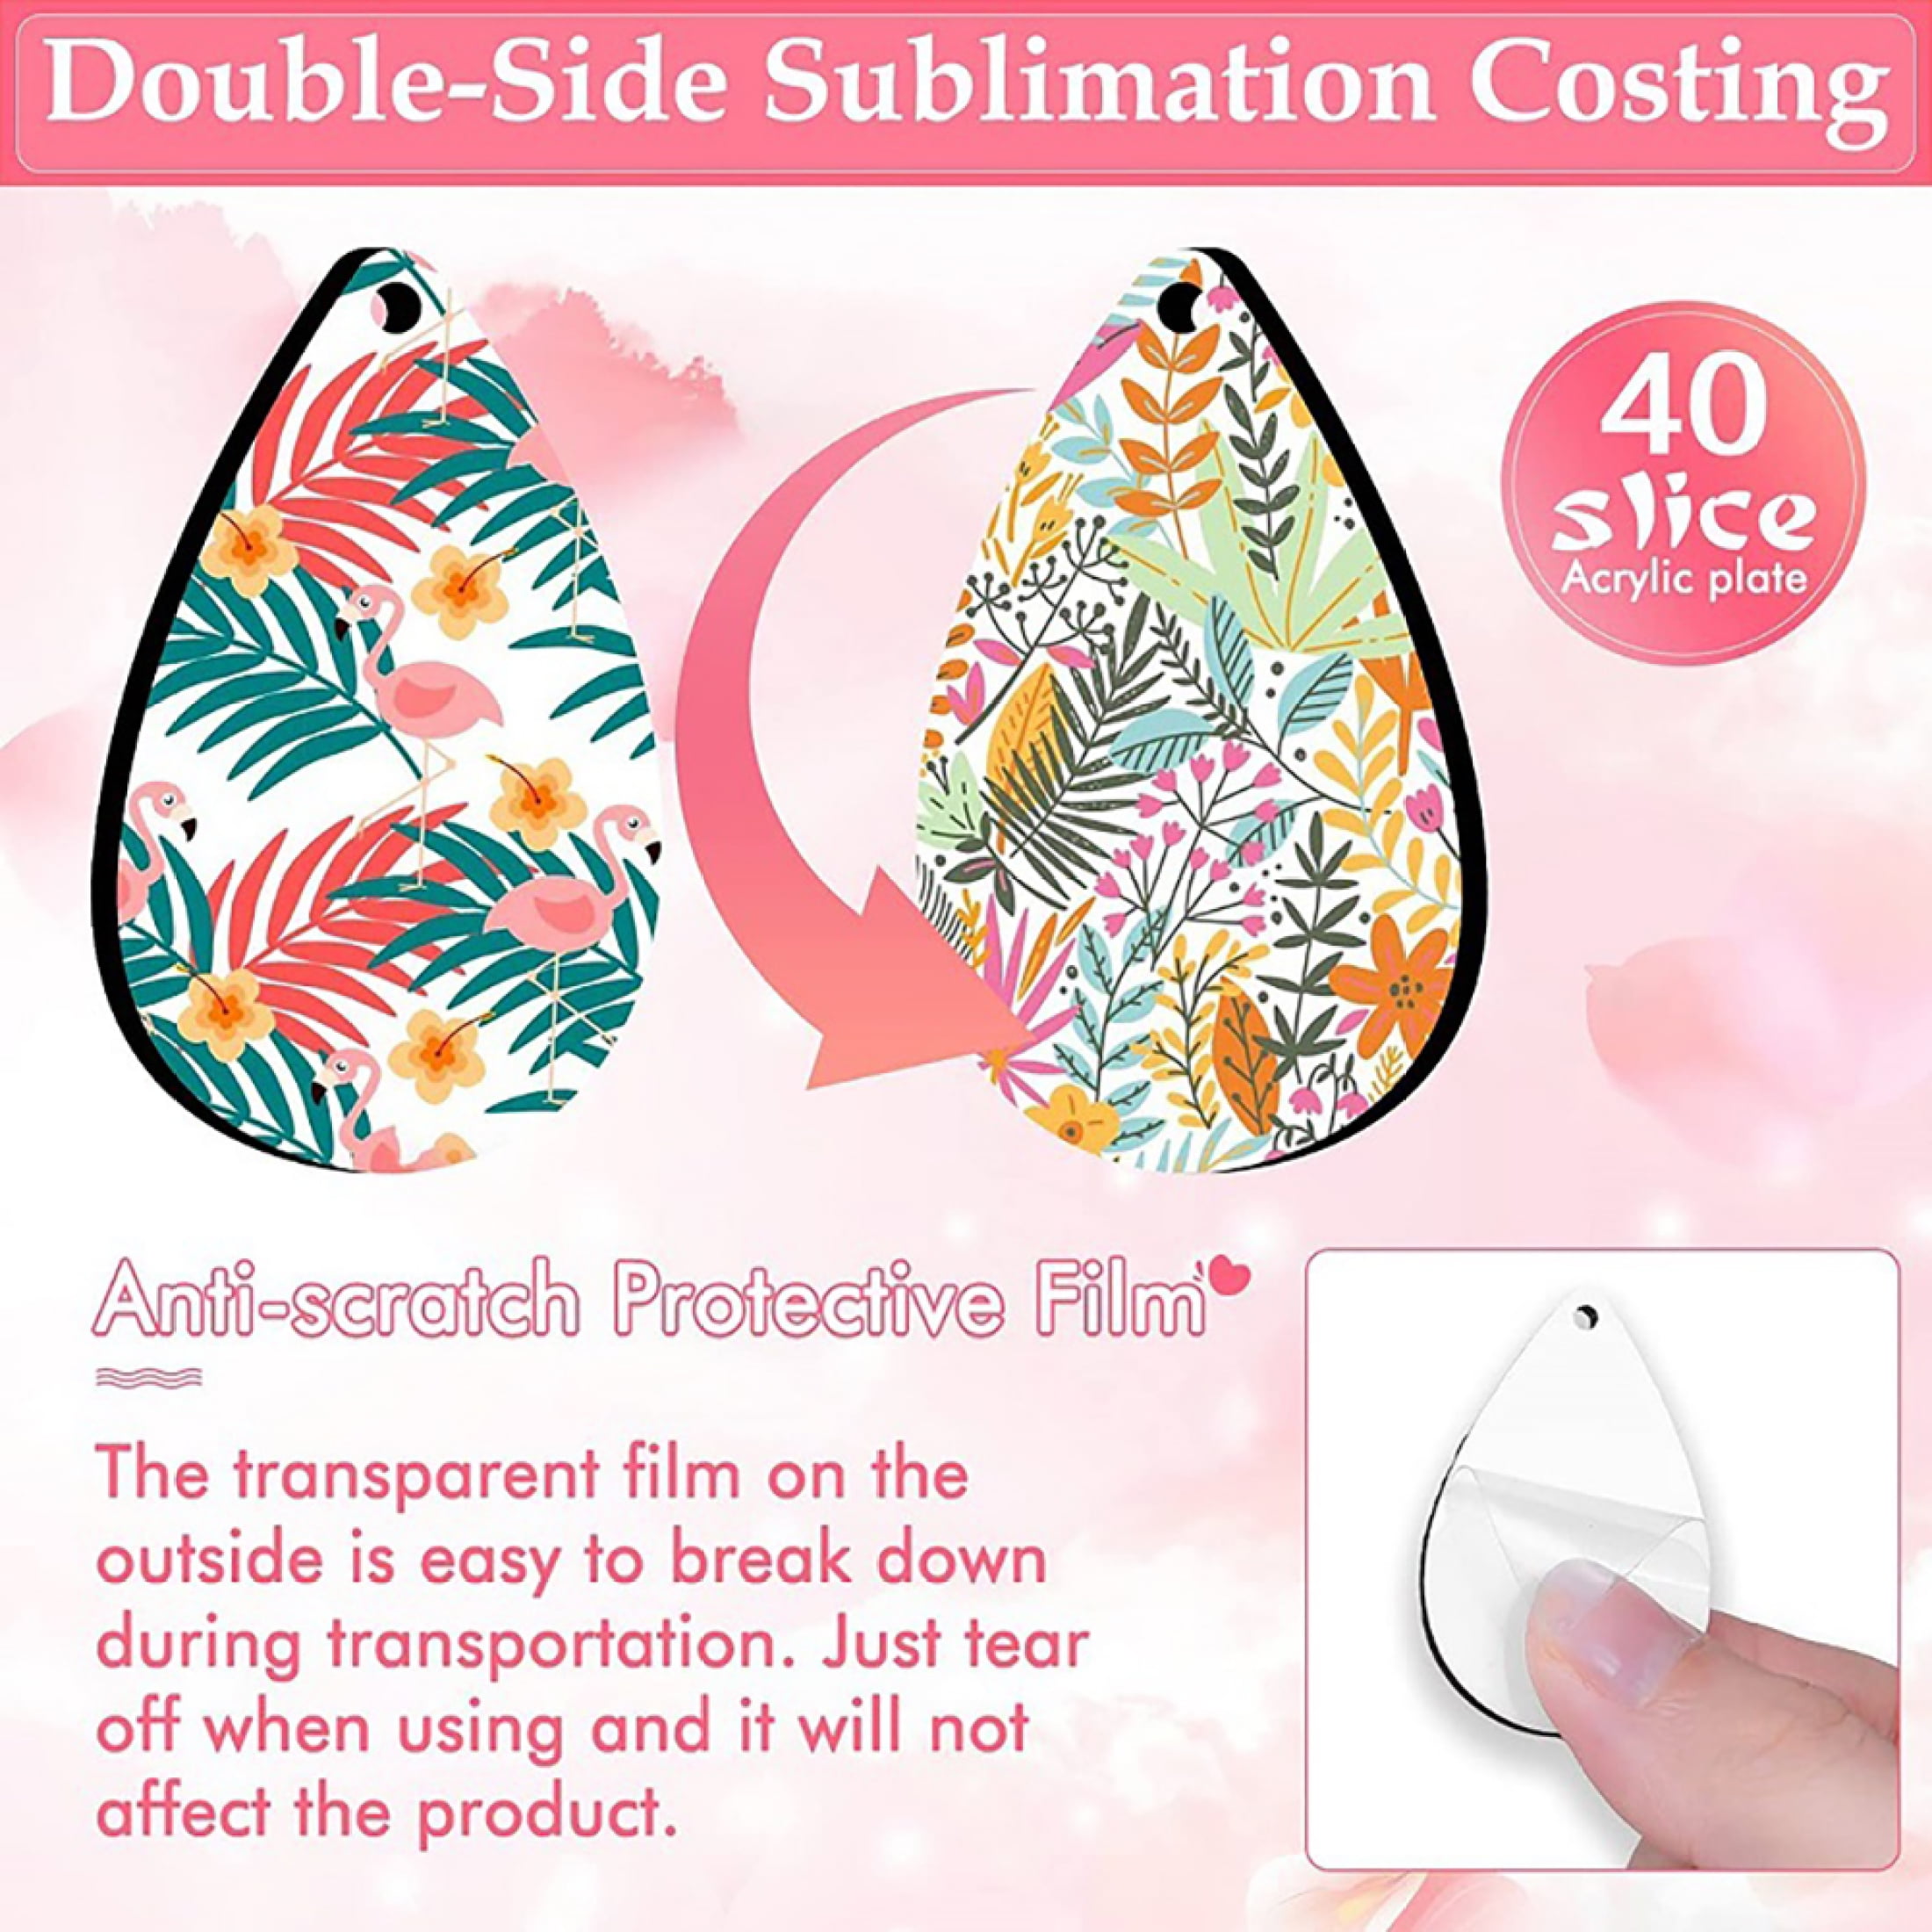 EUBUY 250pcs Sublimation Blank Earrings Set Heat Transfer Earring Ornament  Blanks with Earring Hooks and Jump Rings for Jewelry DIY Making Supplies 